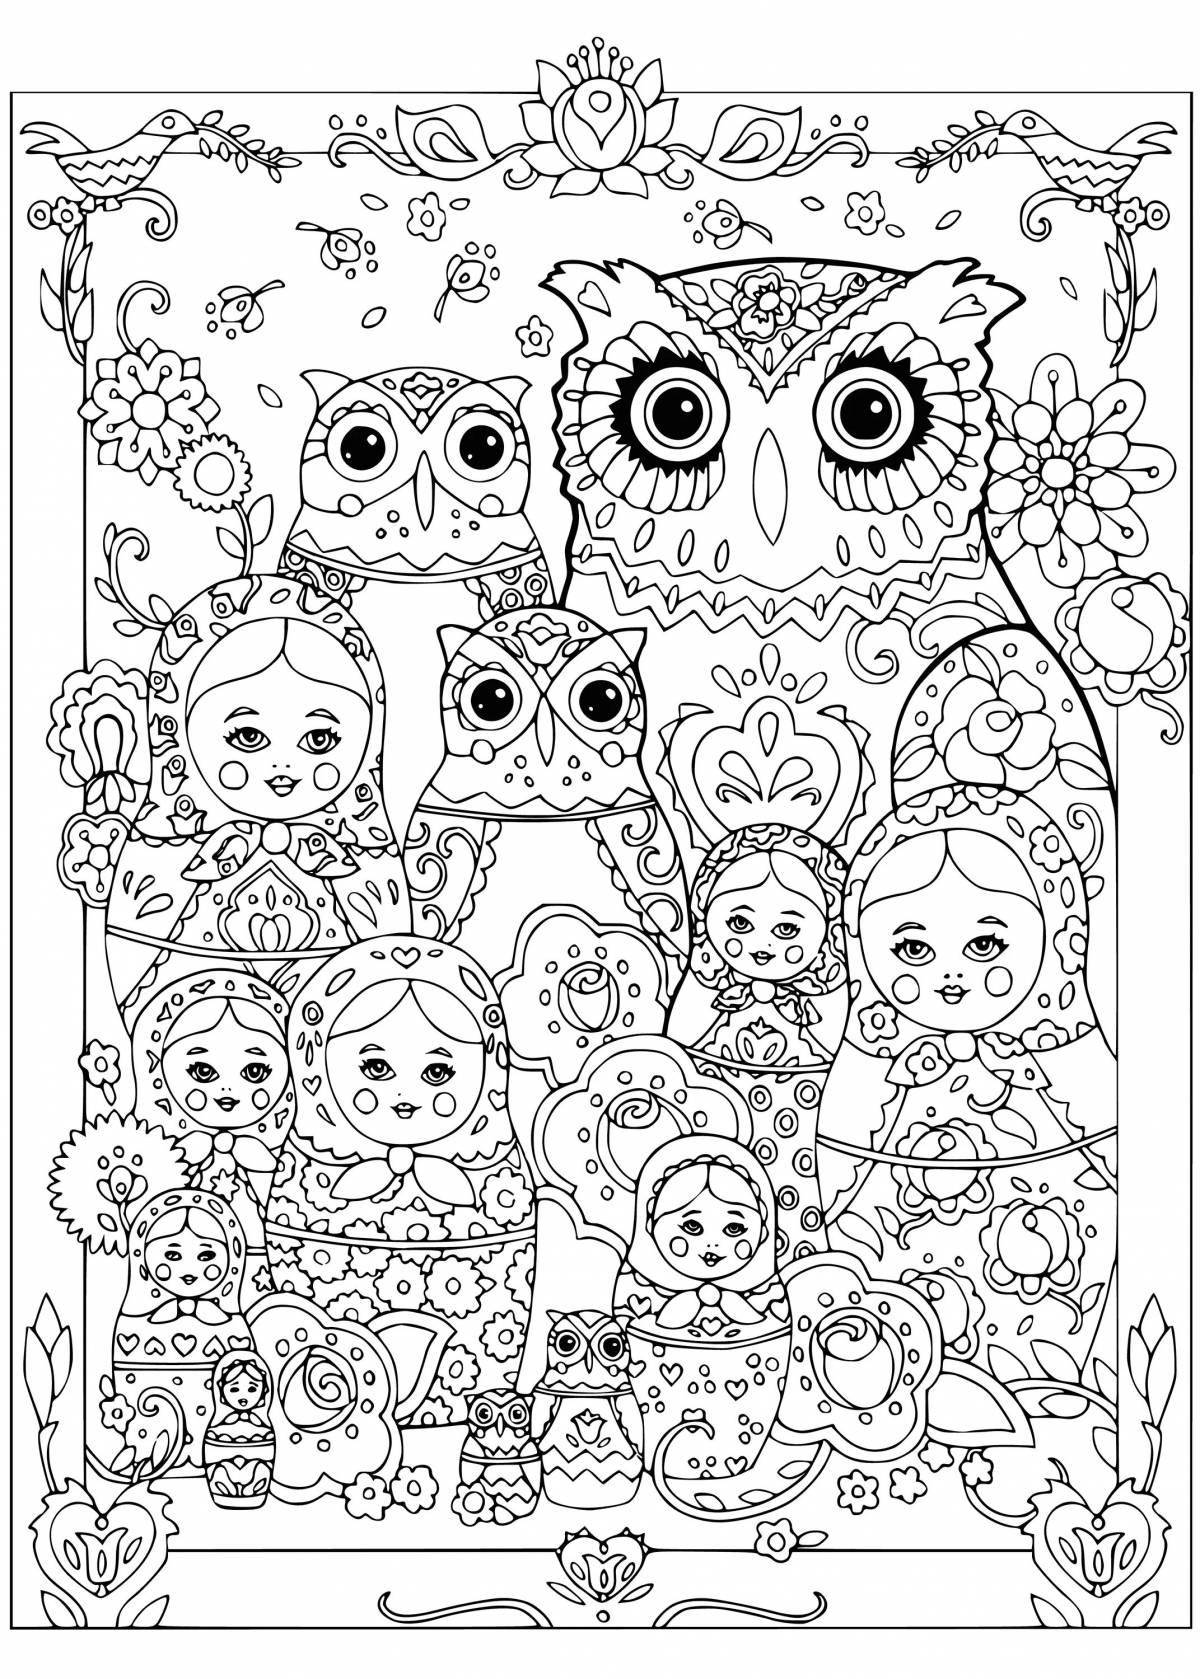 Charming complex owl coloring book